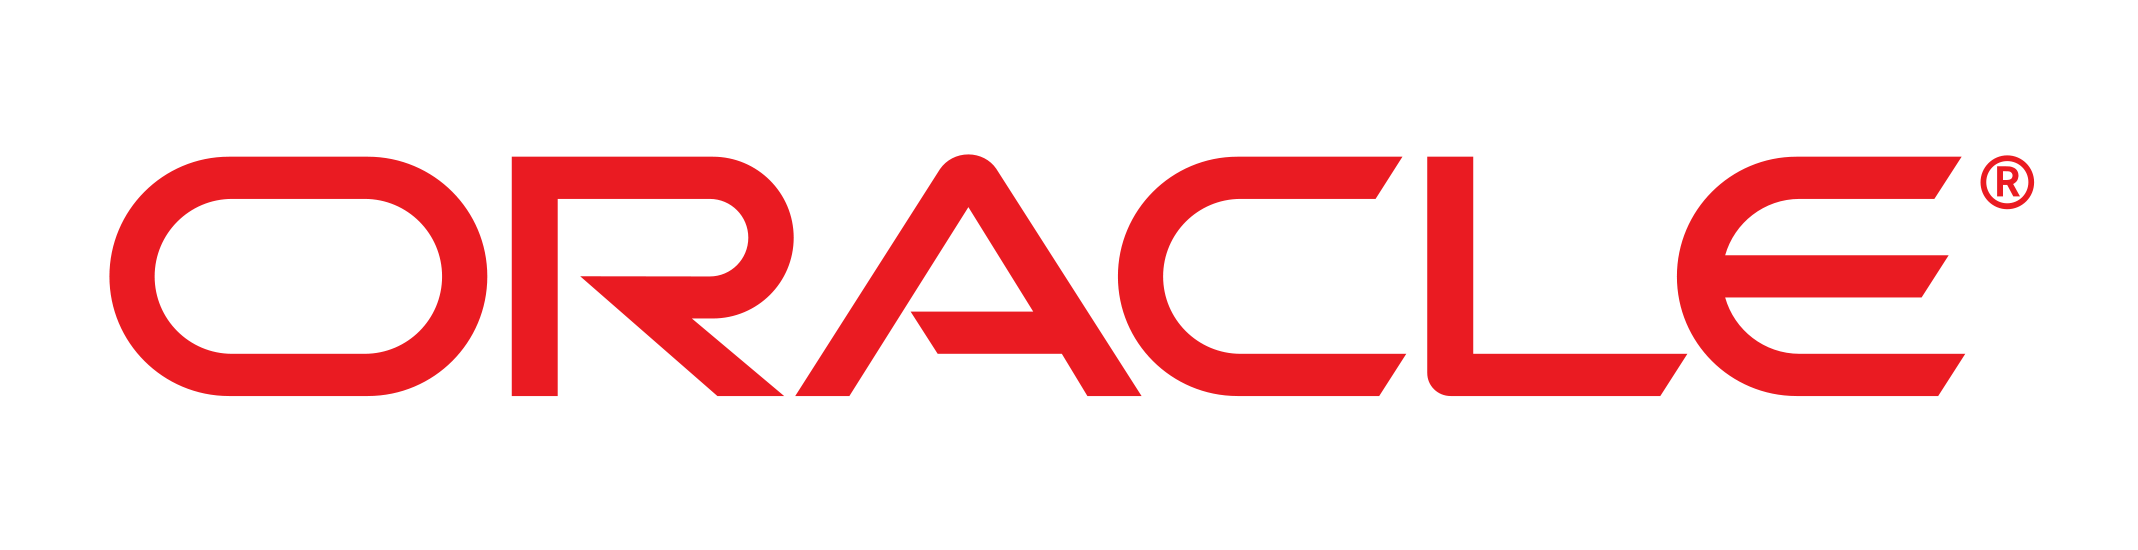 Image result for oracle logo